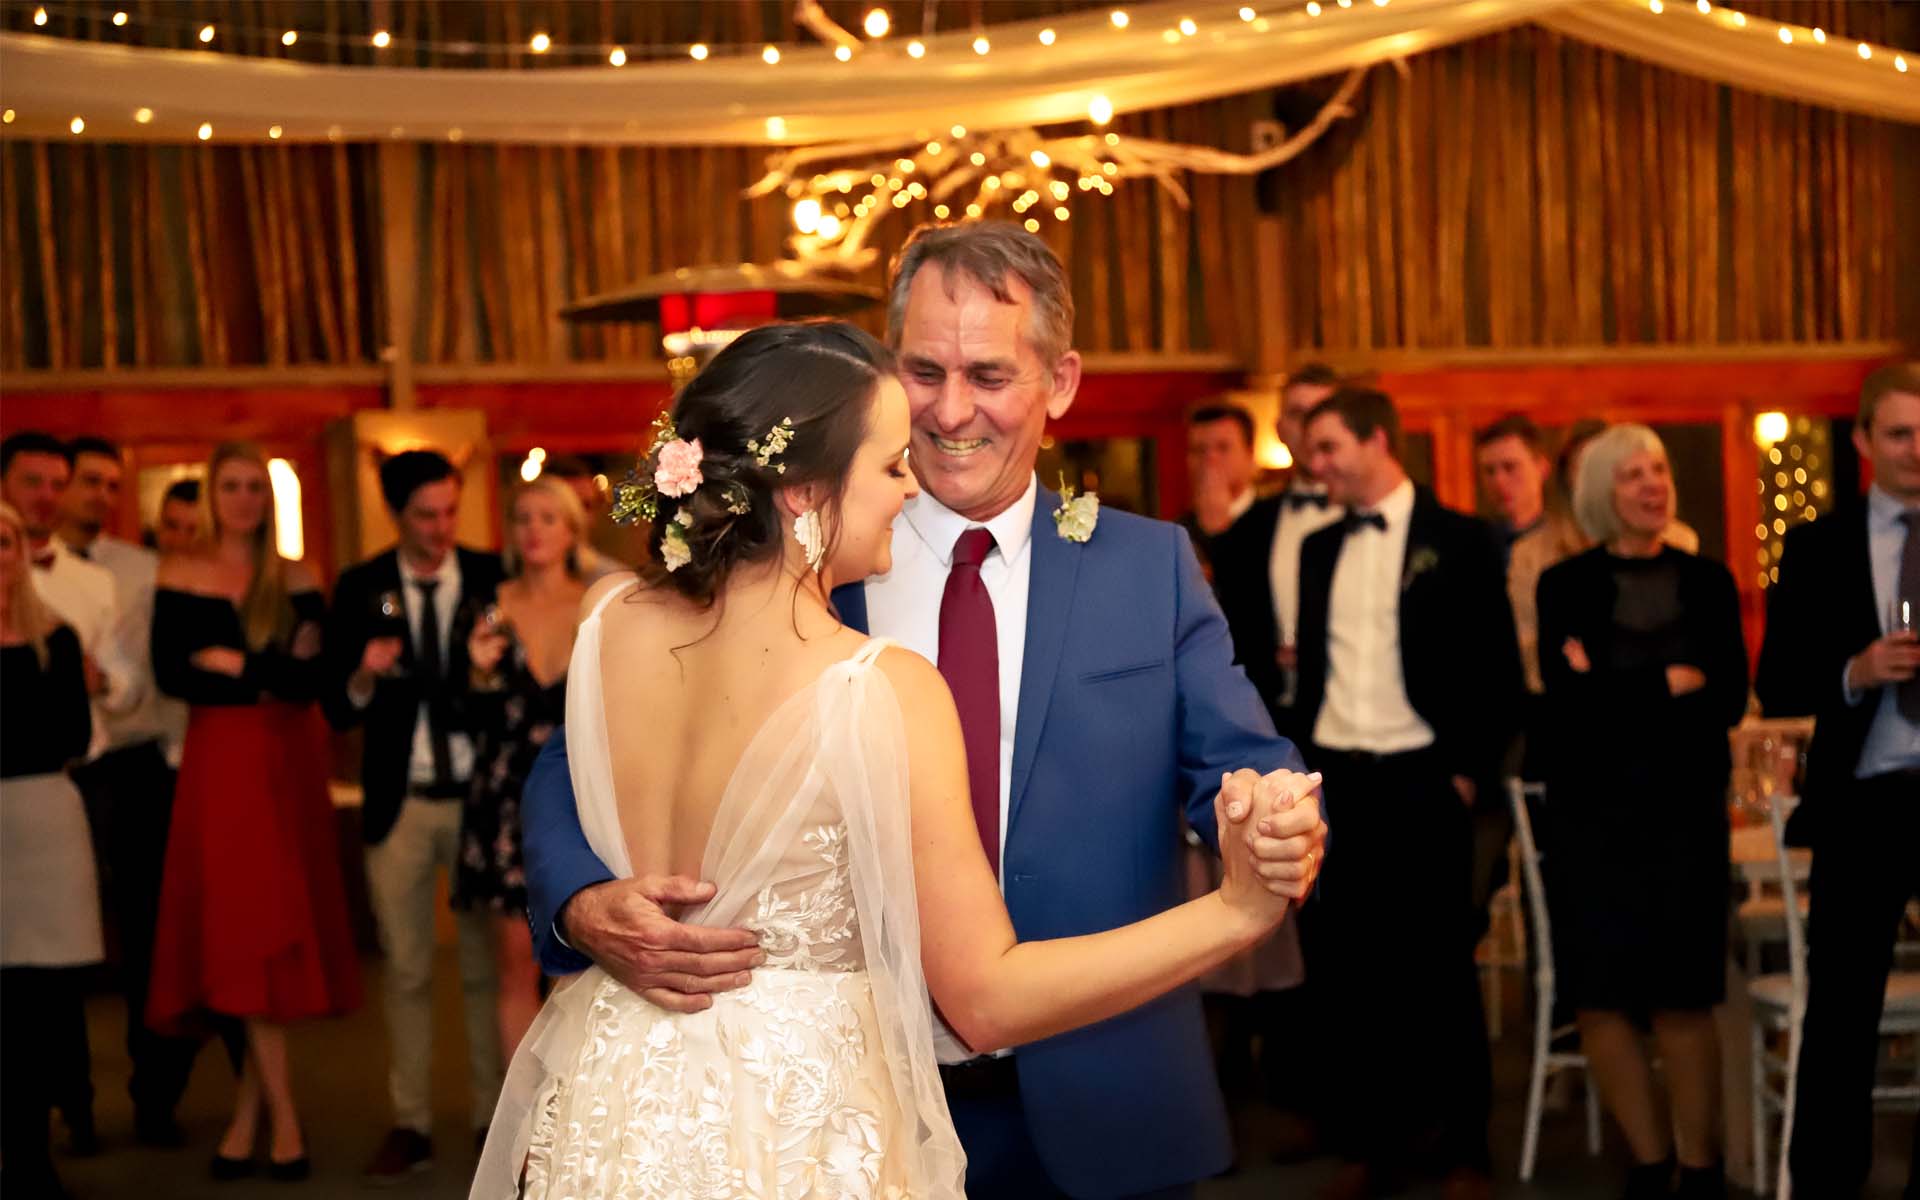 Wedding Song Suggestions for KZN Midlands Weddings and DJ Songs for Father Daughter Dances